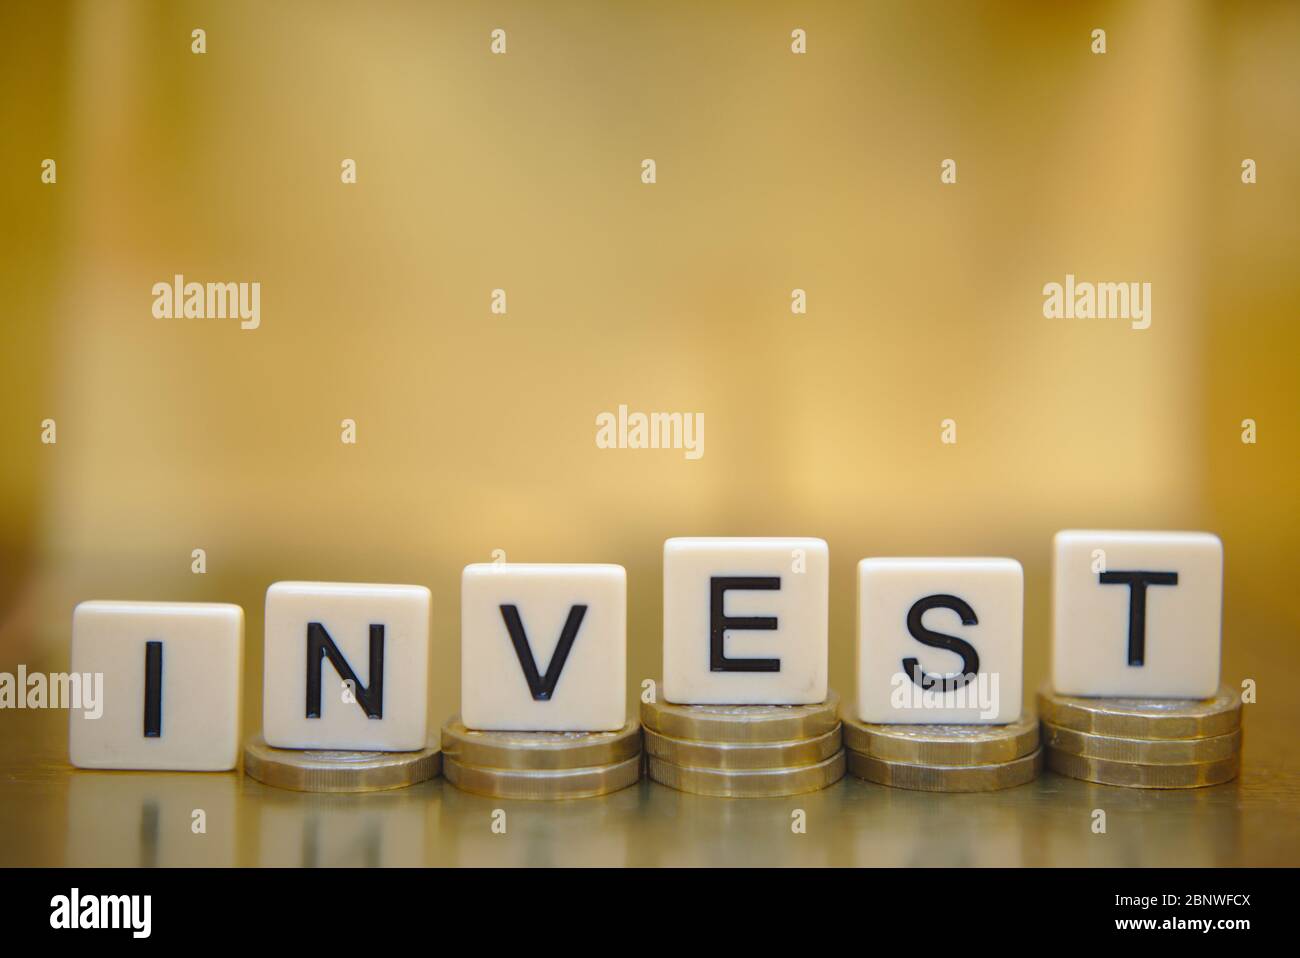 Investment savings and financial planning concept. Stock Photo